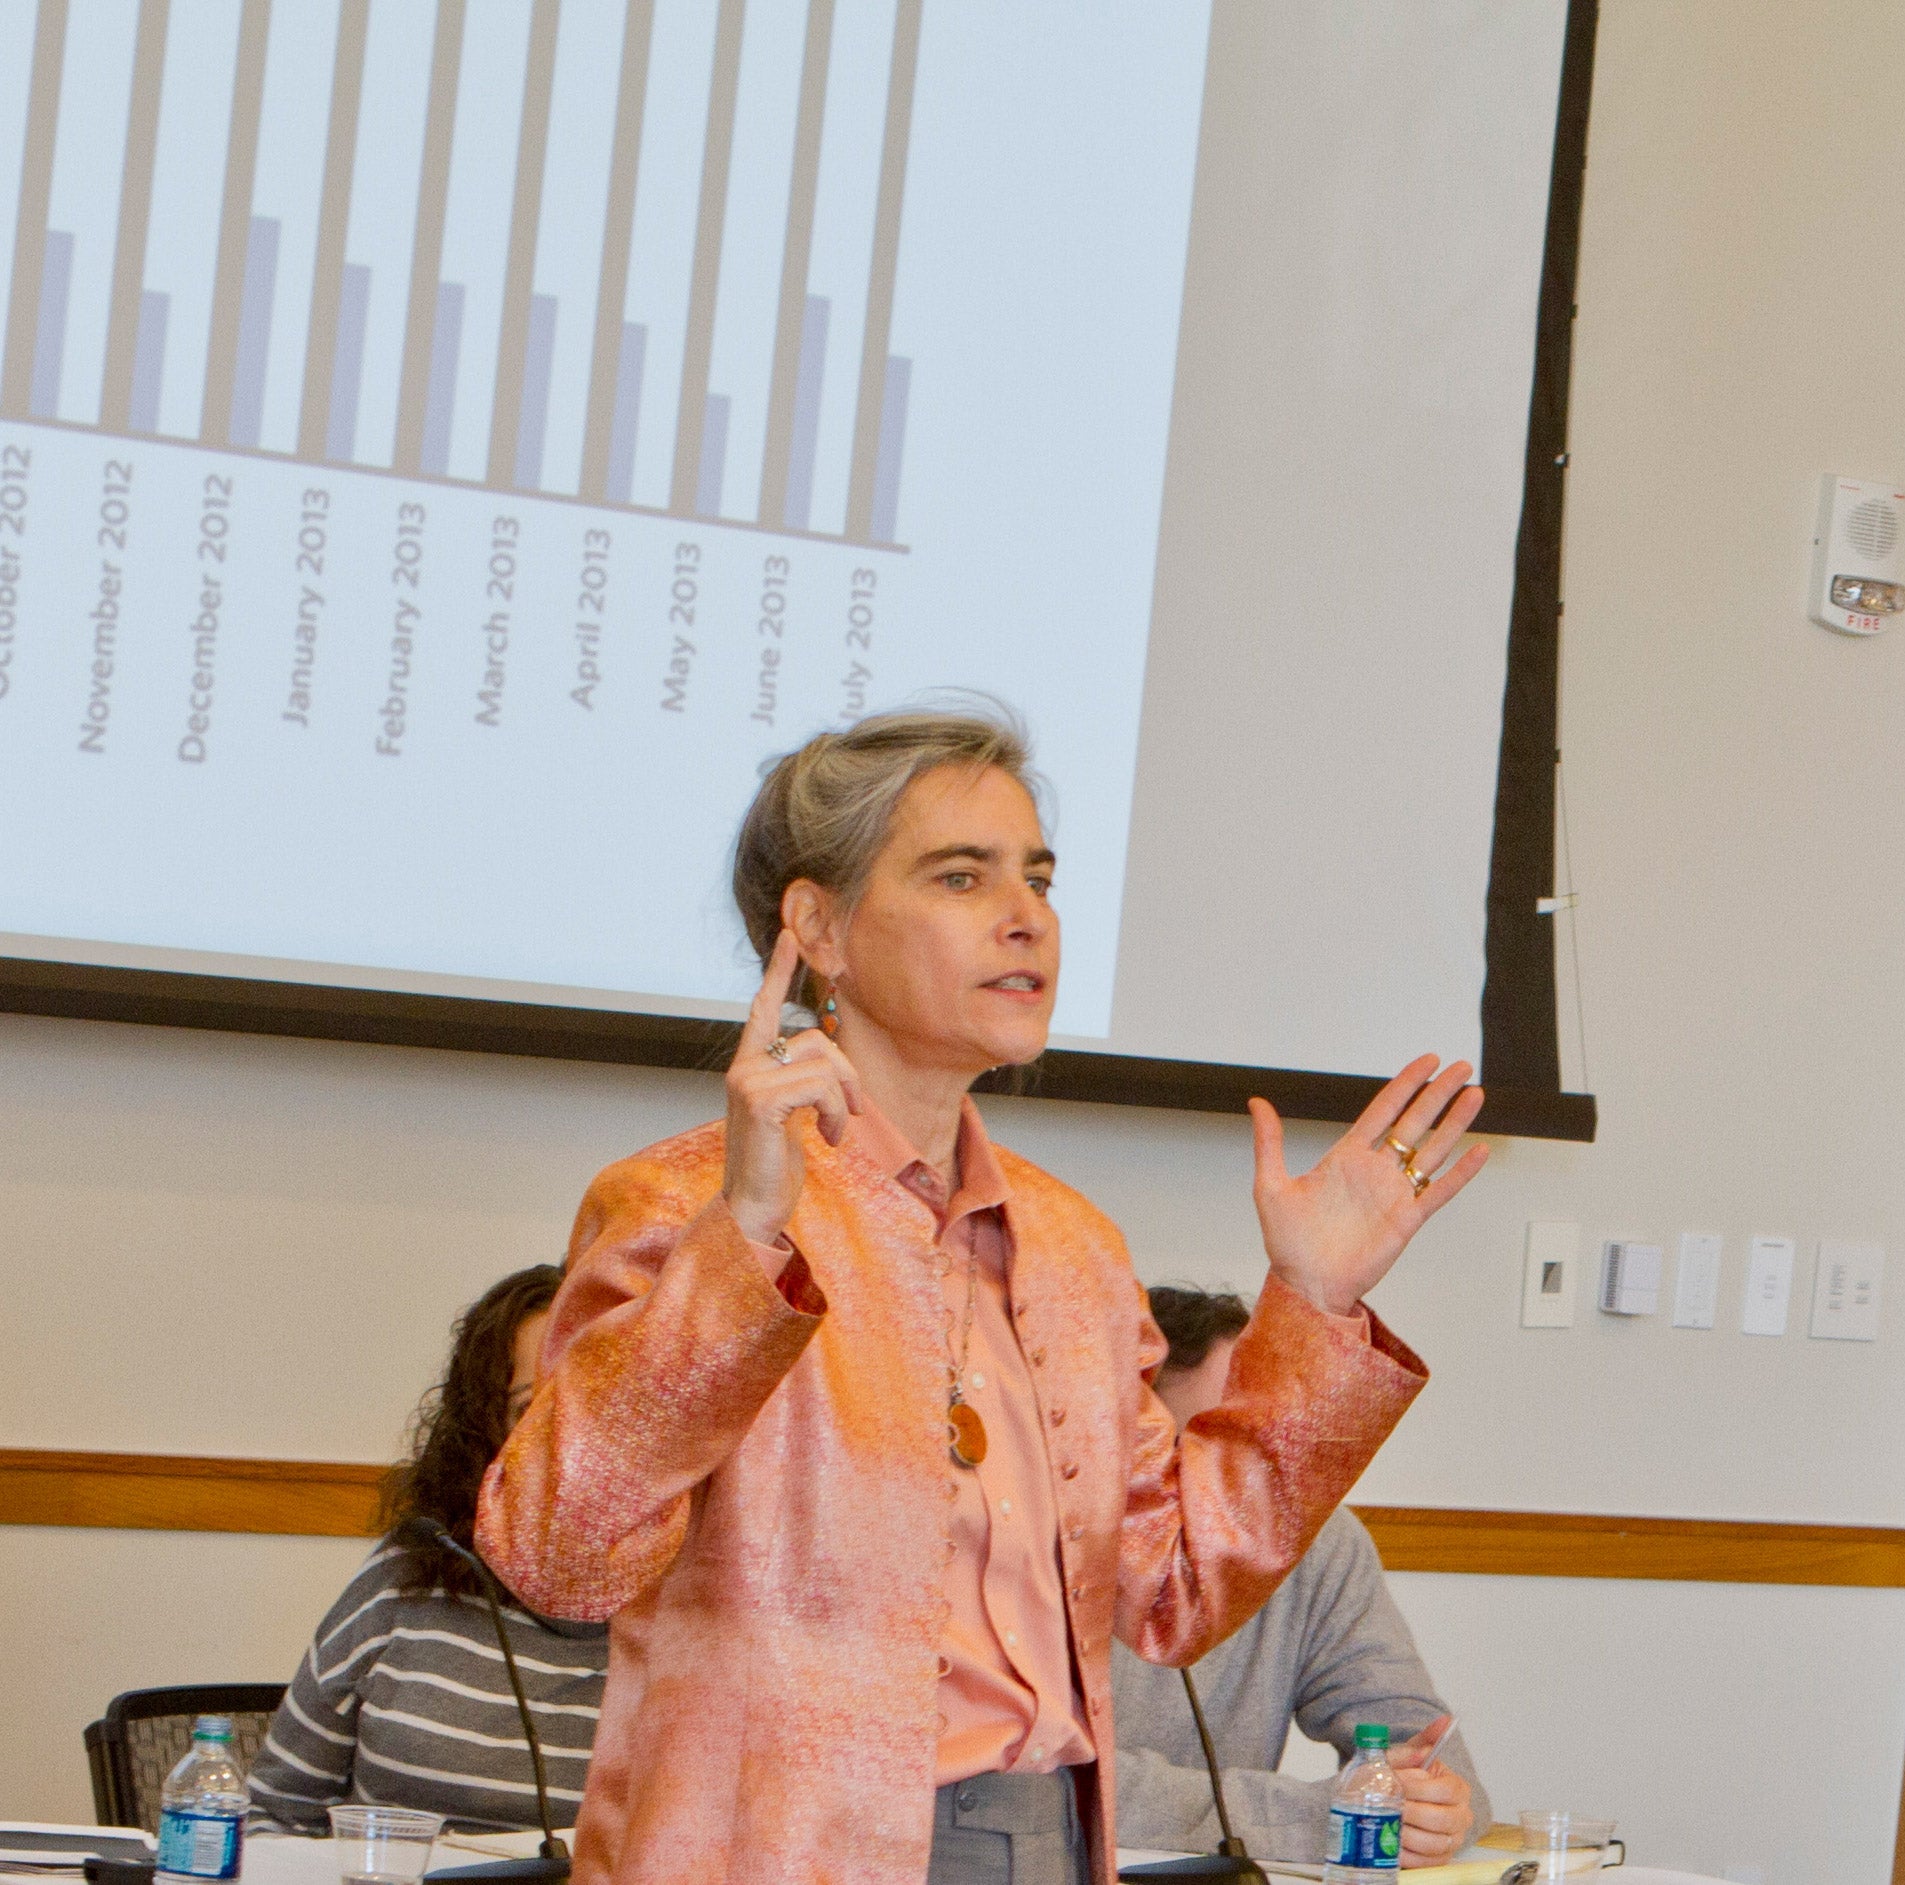 Sarah Chayes speaking at the front of the room with her arms out